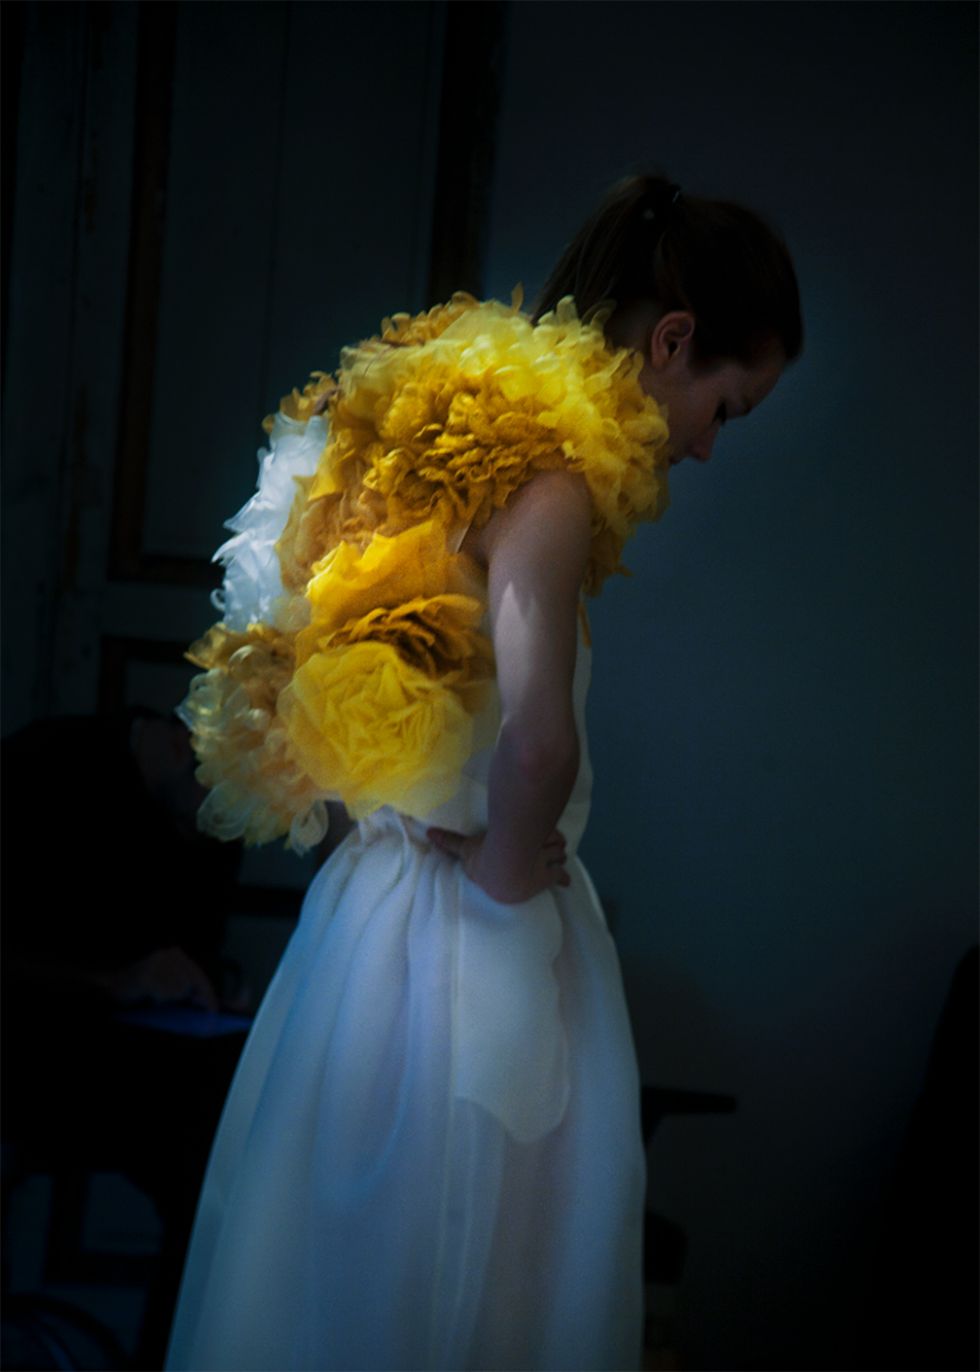 Erik Madigan Heck photography exhibition at Sotheby's